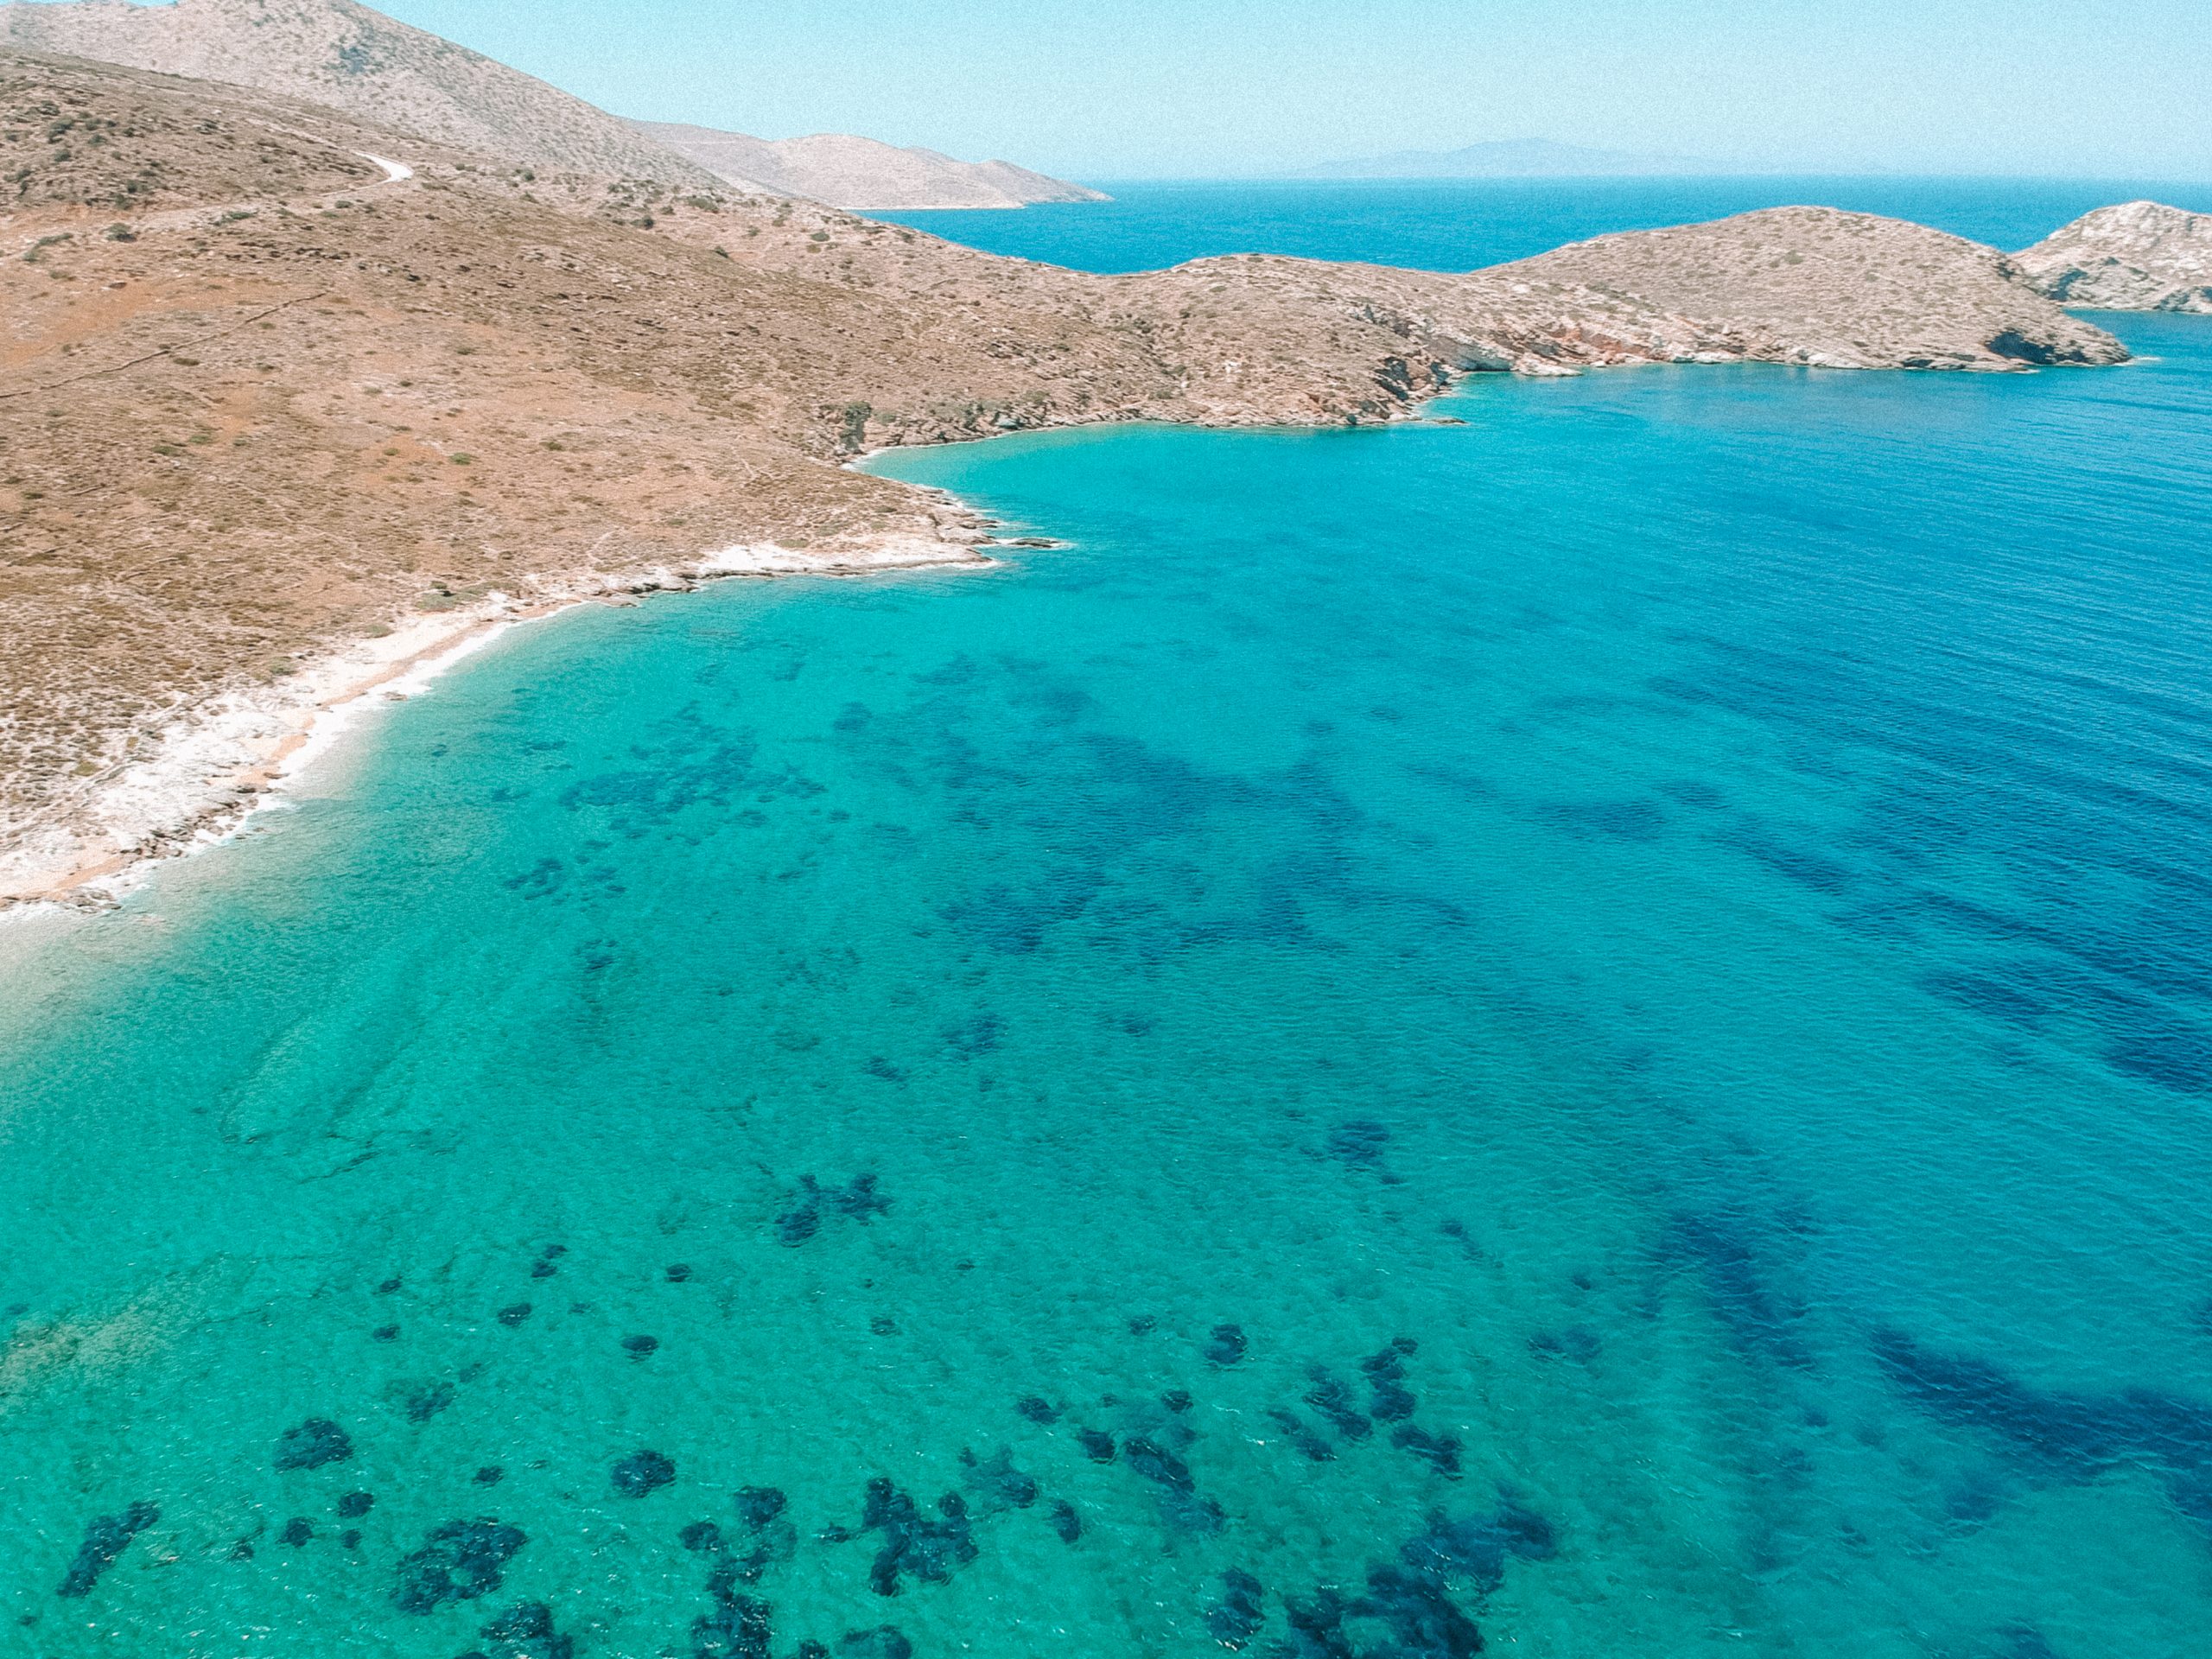 Turquoise waters of Ios.